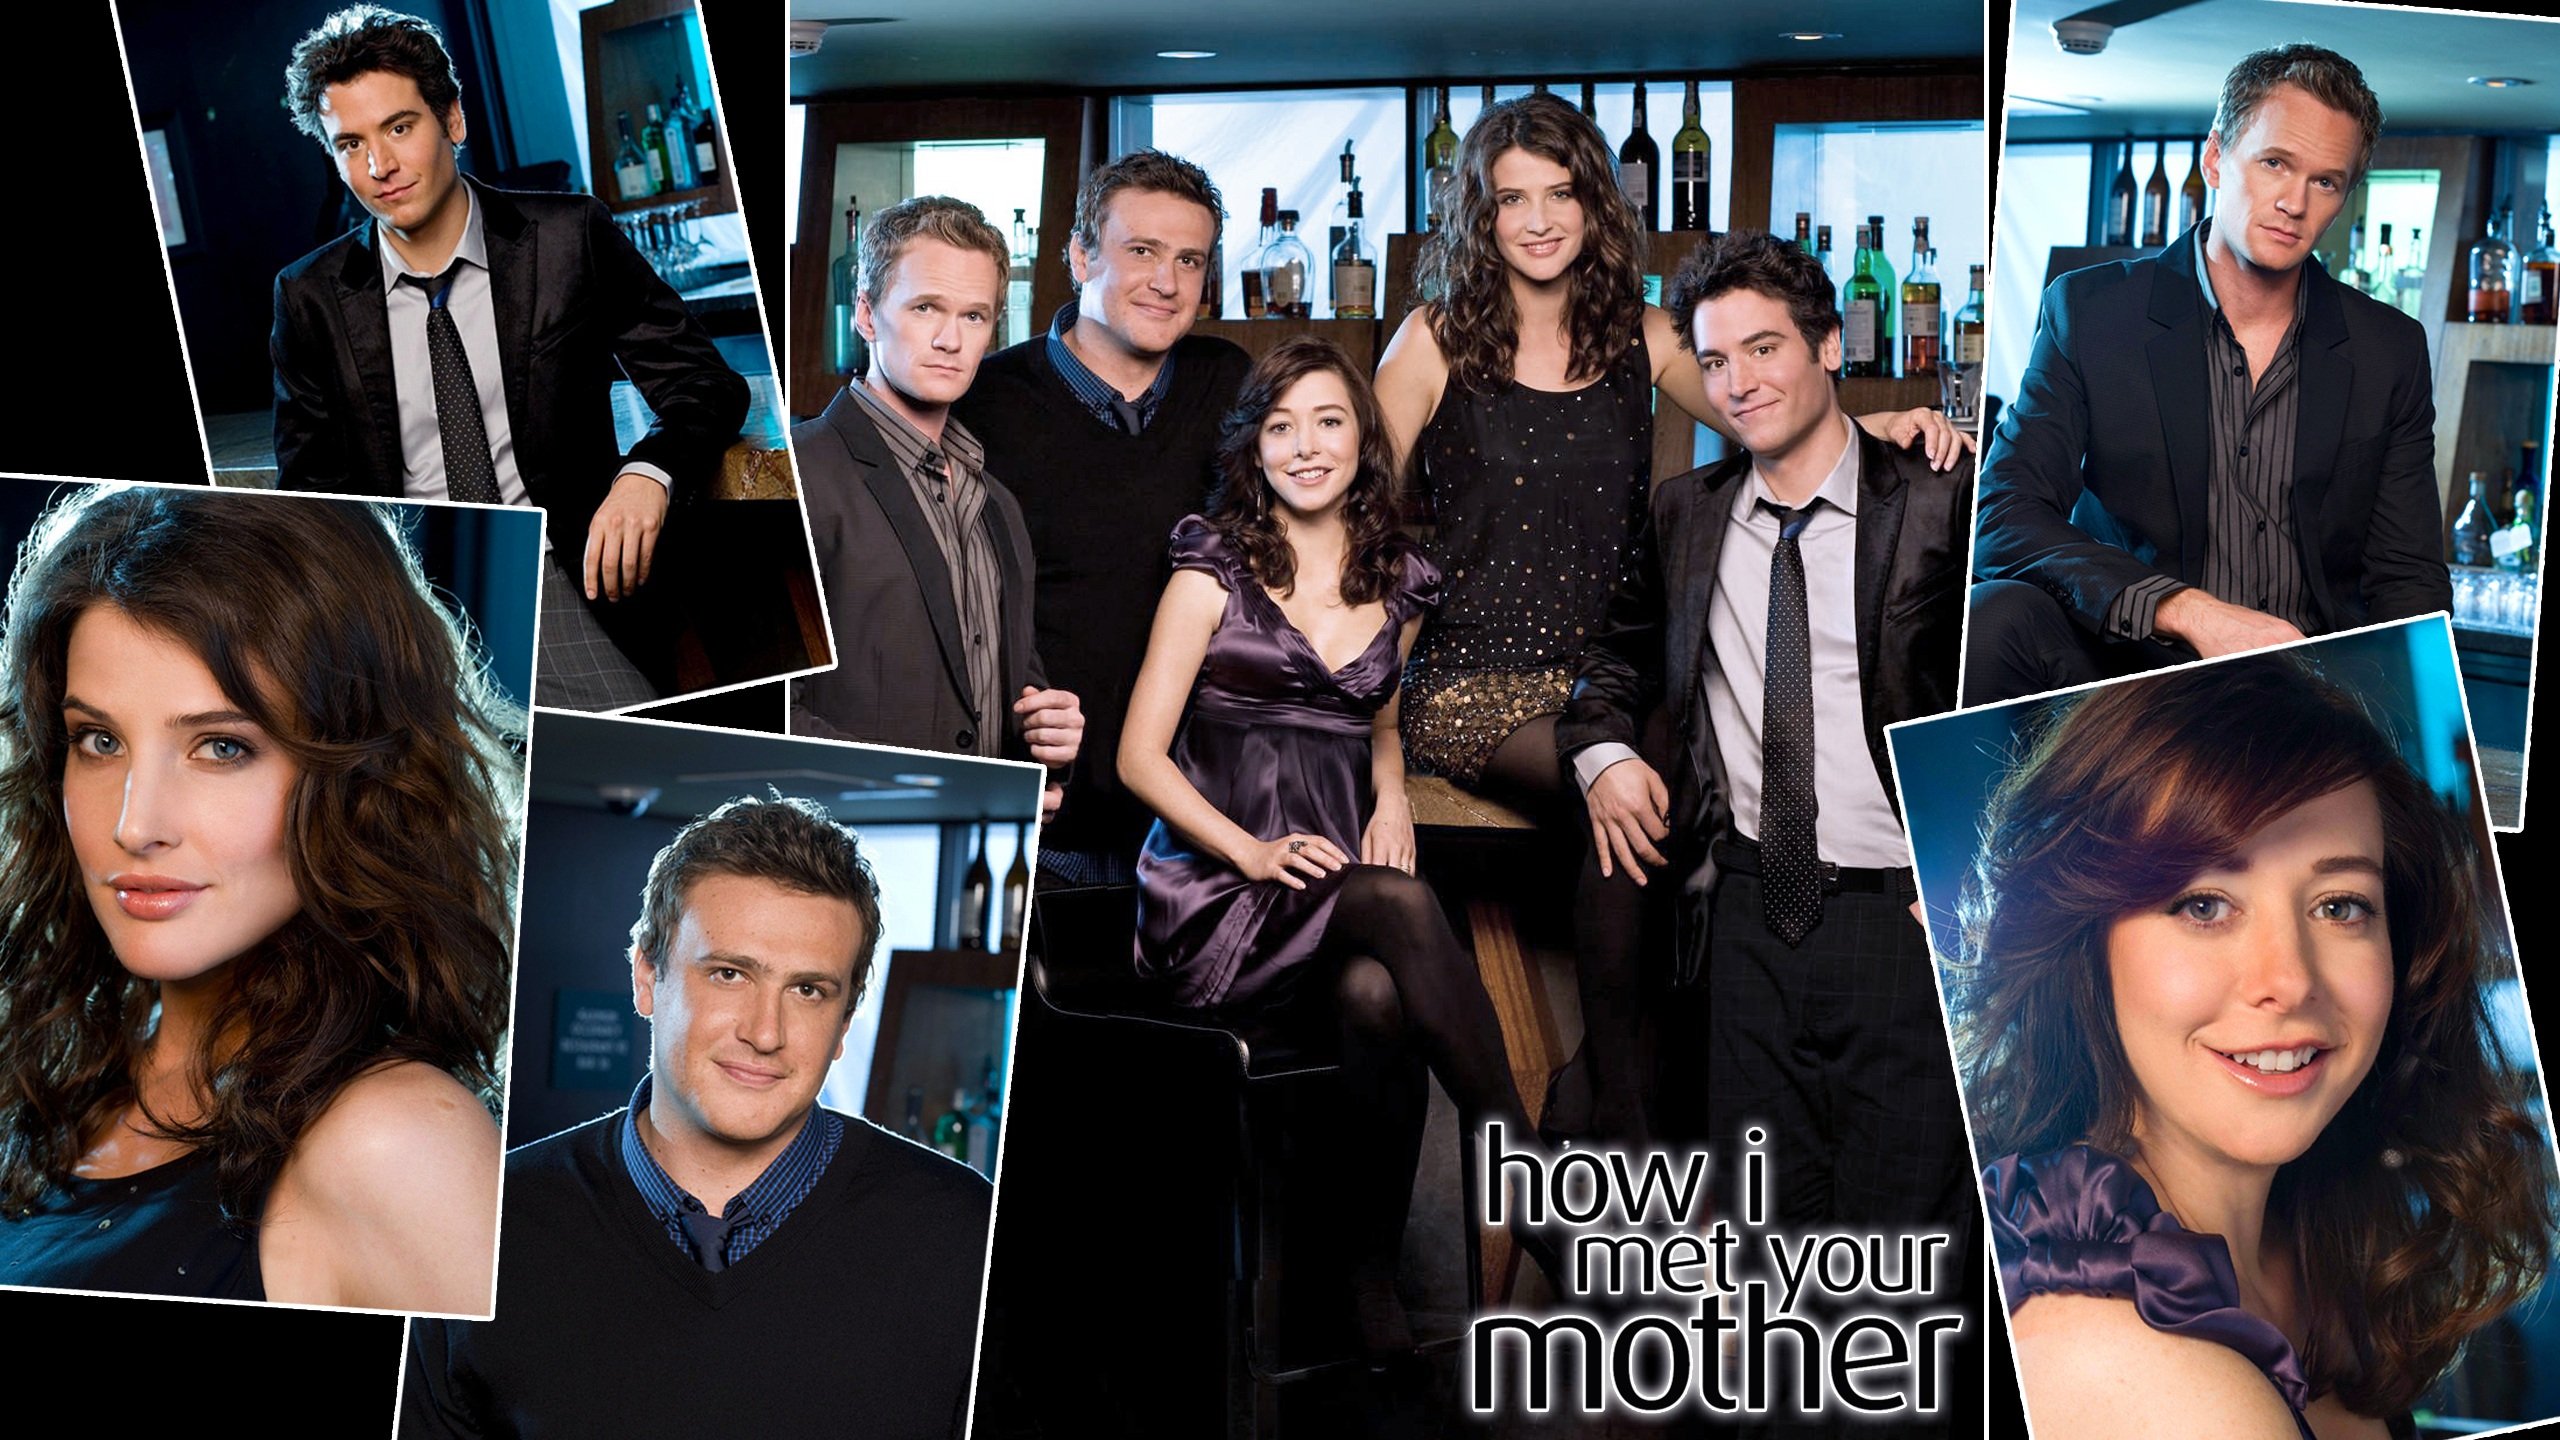 how i met your mother, Comedy, Sitcom, Series, Television, How, Met, Mother,  6 Wallpaper